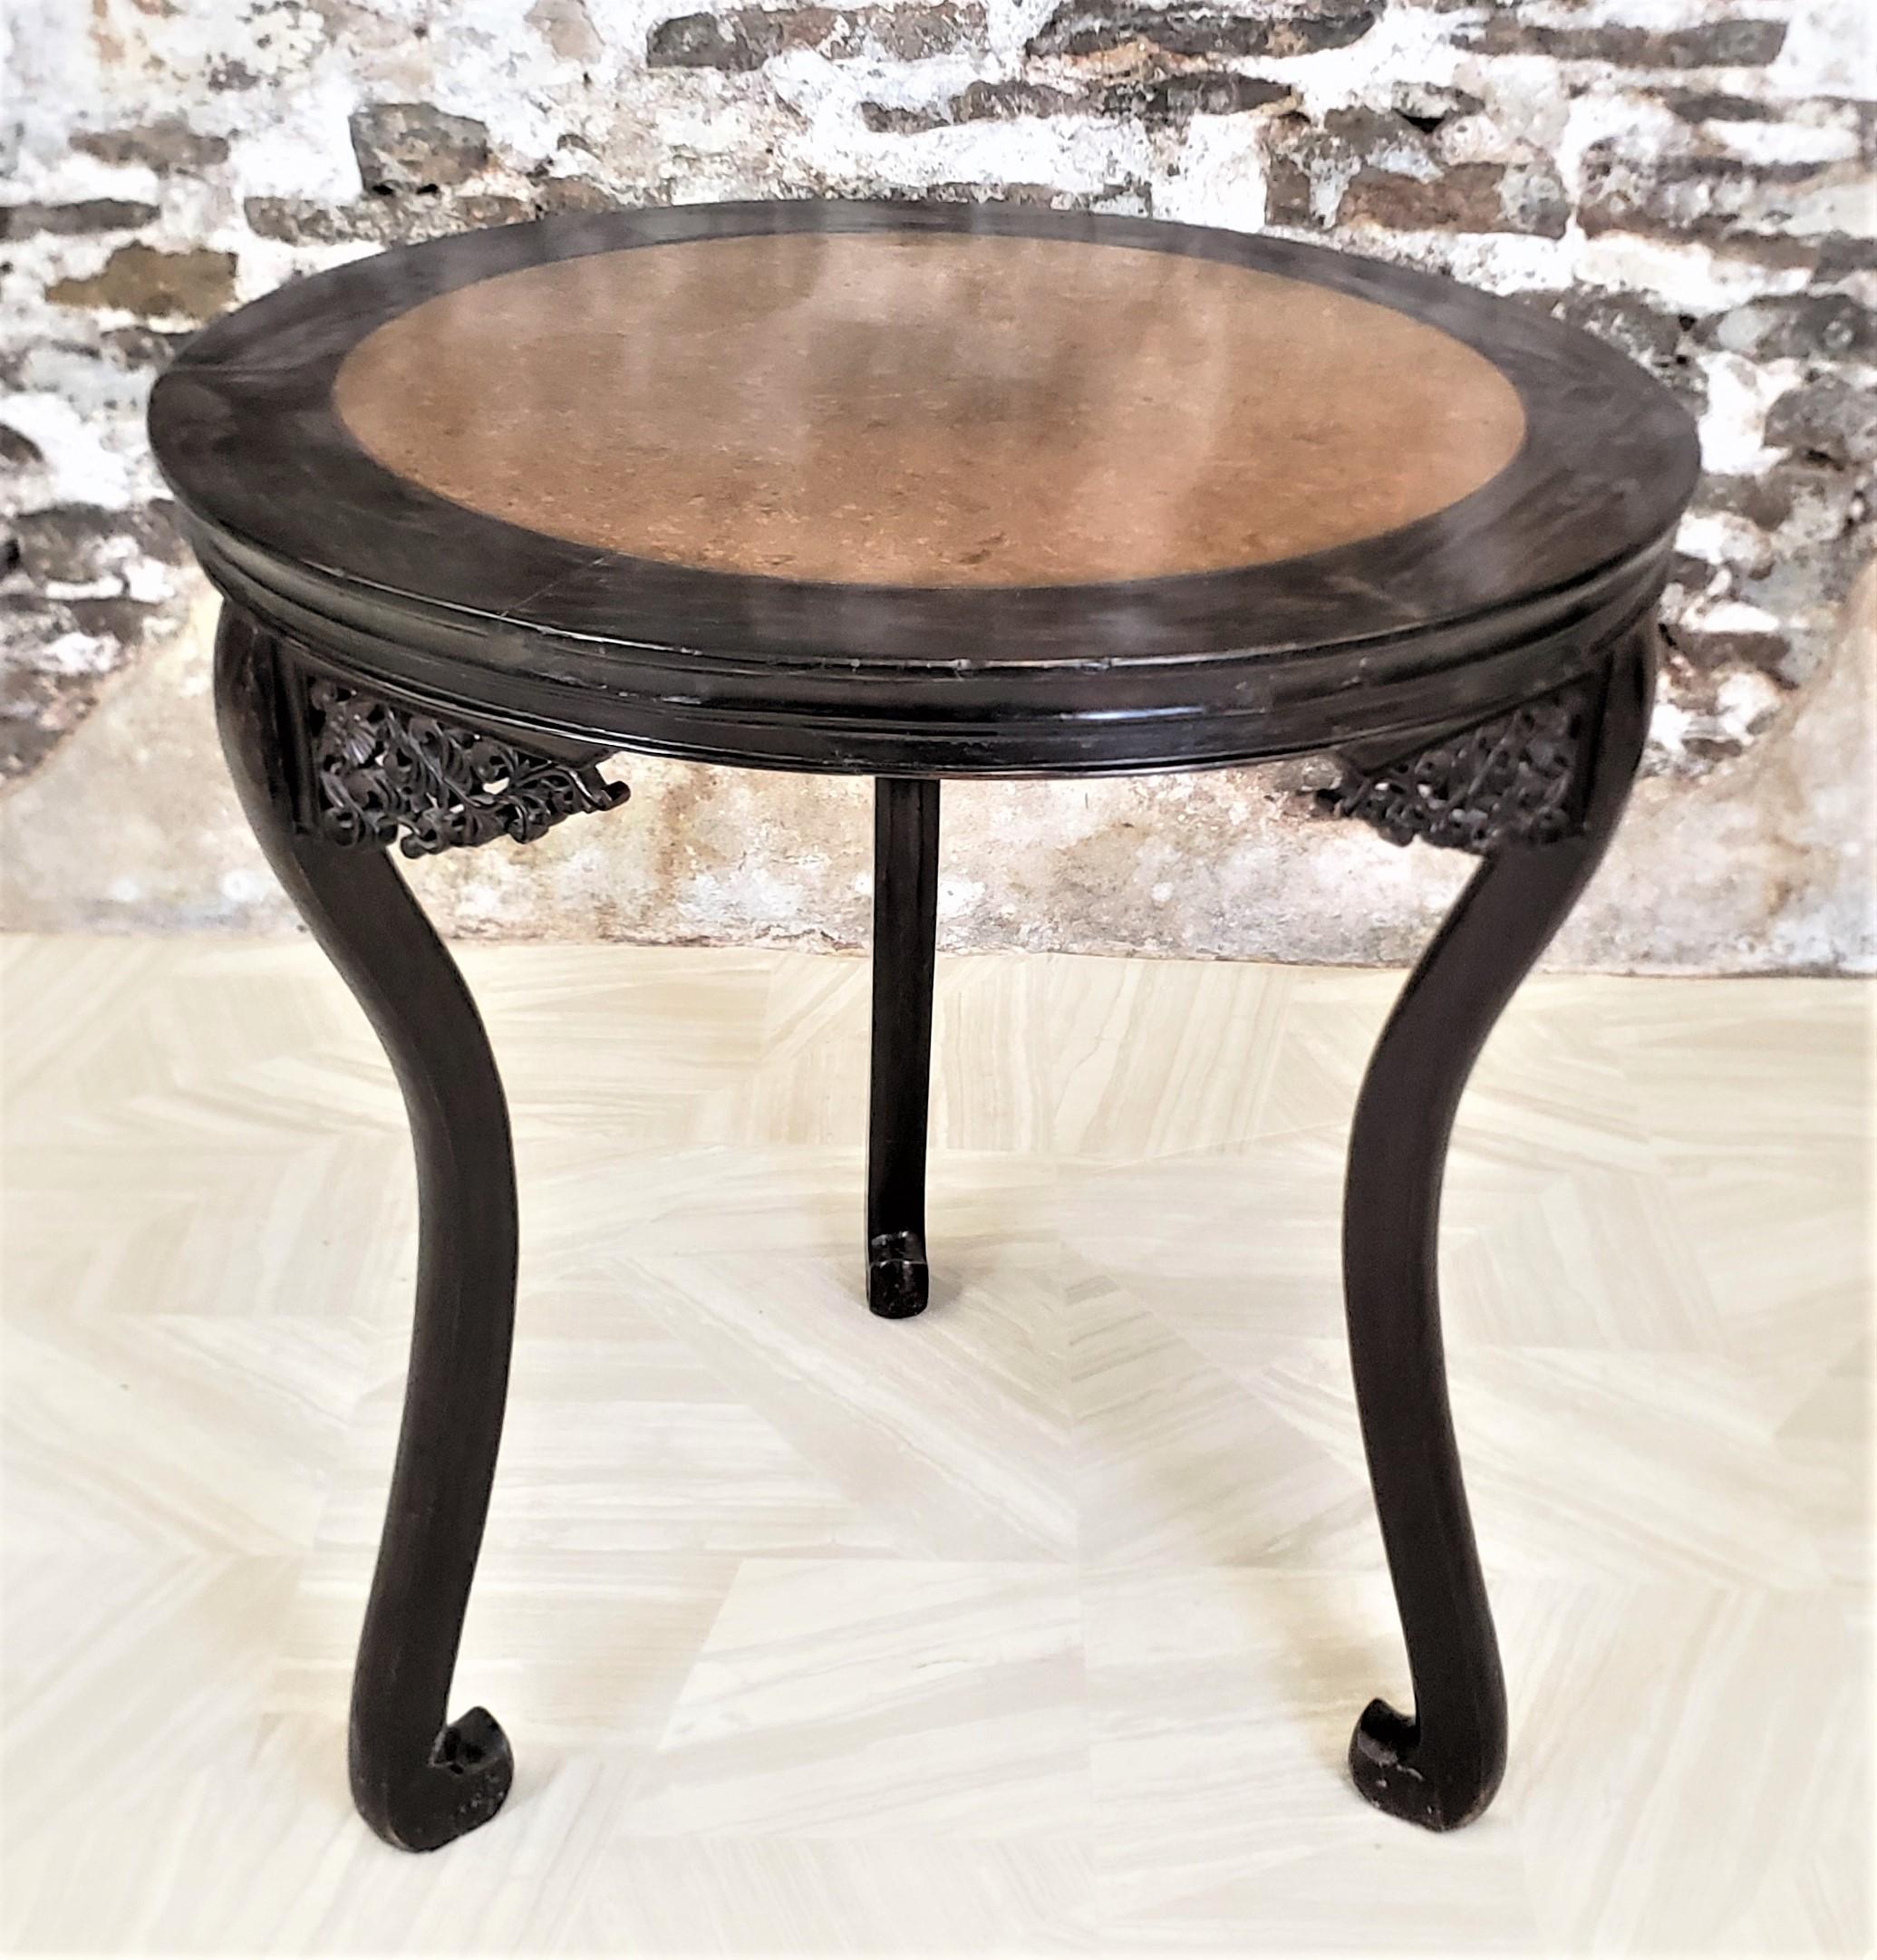 This round antique occasional table shows no maker's markings, but is presumed to have originated from China and dates to approximately 1890 and done in a period Chinese Export style. The table is constructed from a hardwood, which has been hand